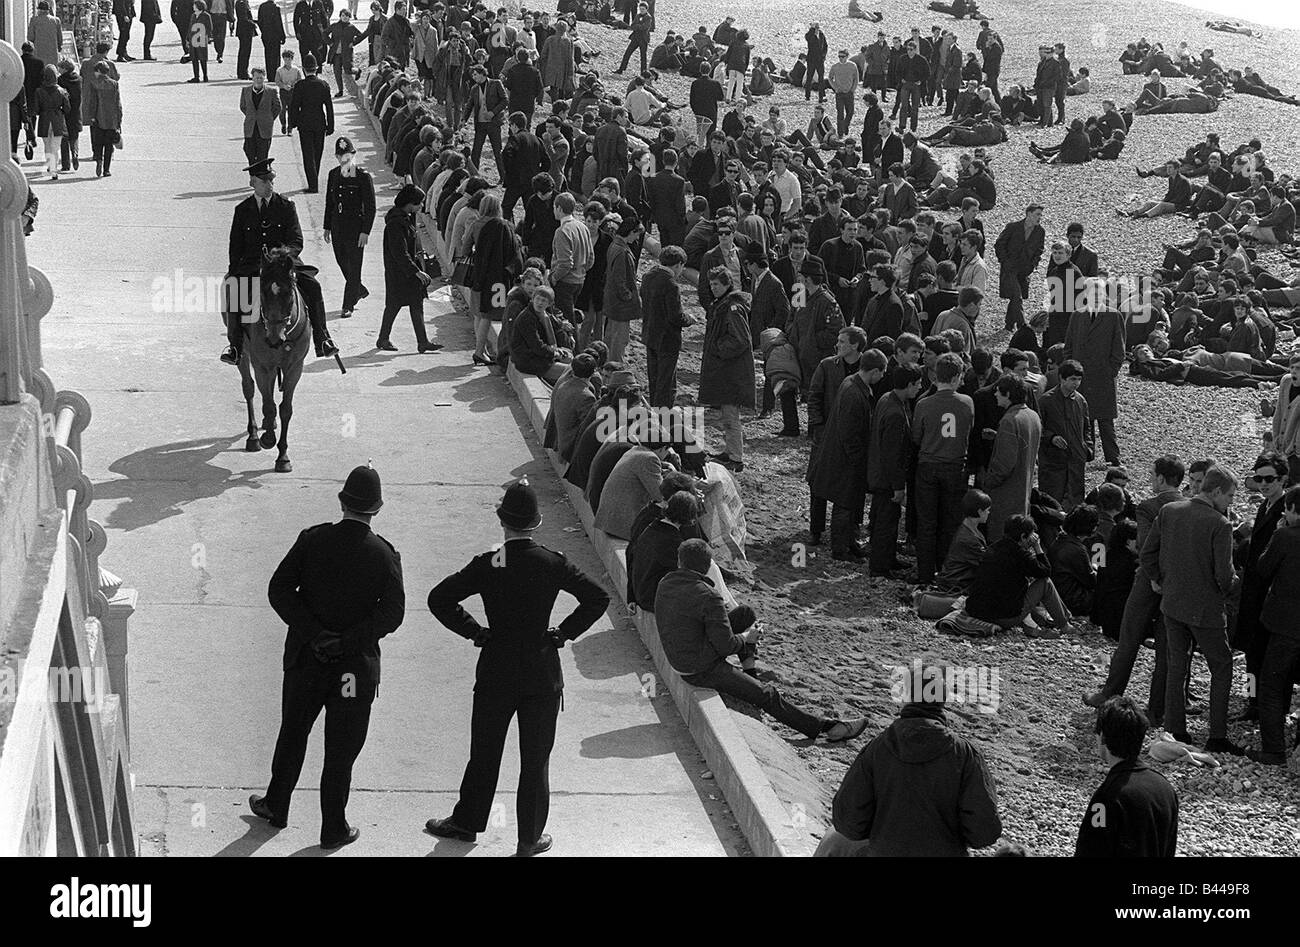 Youth Culture Mod Mods Swinging Sixties Collections April 1965 Mods on the seafront at Brighton watched over by local police Stock Photo